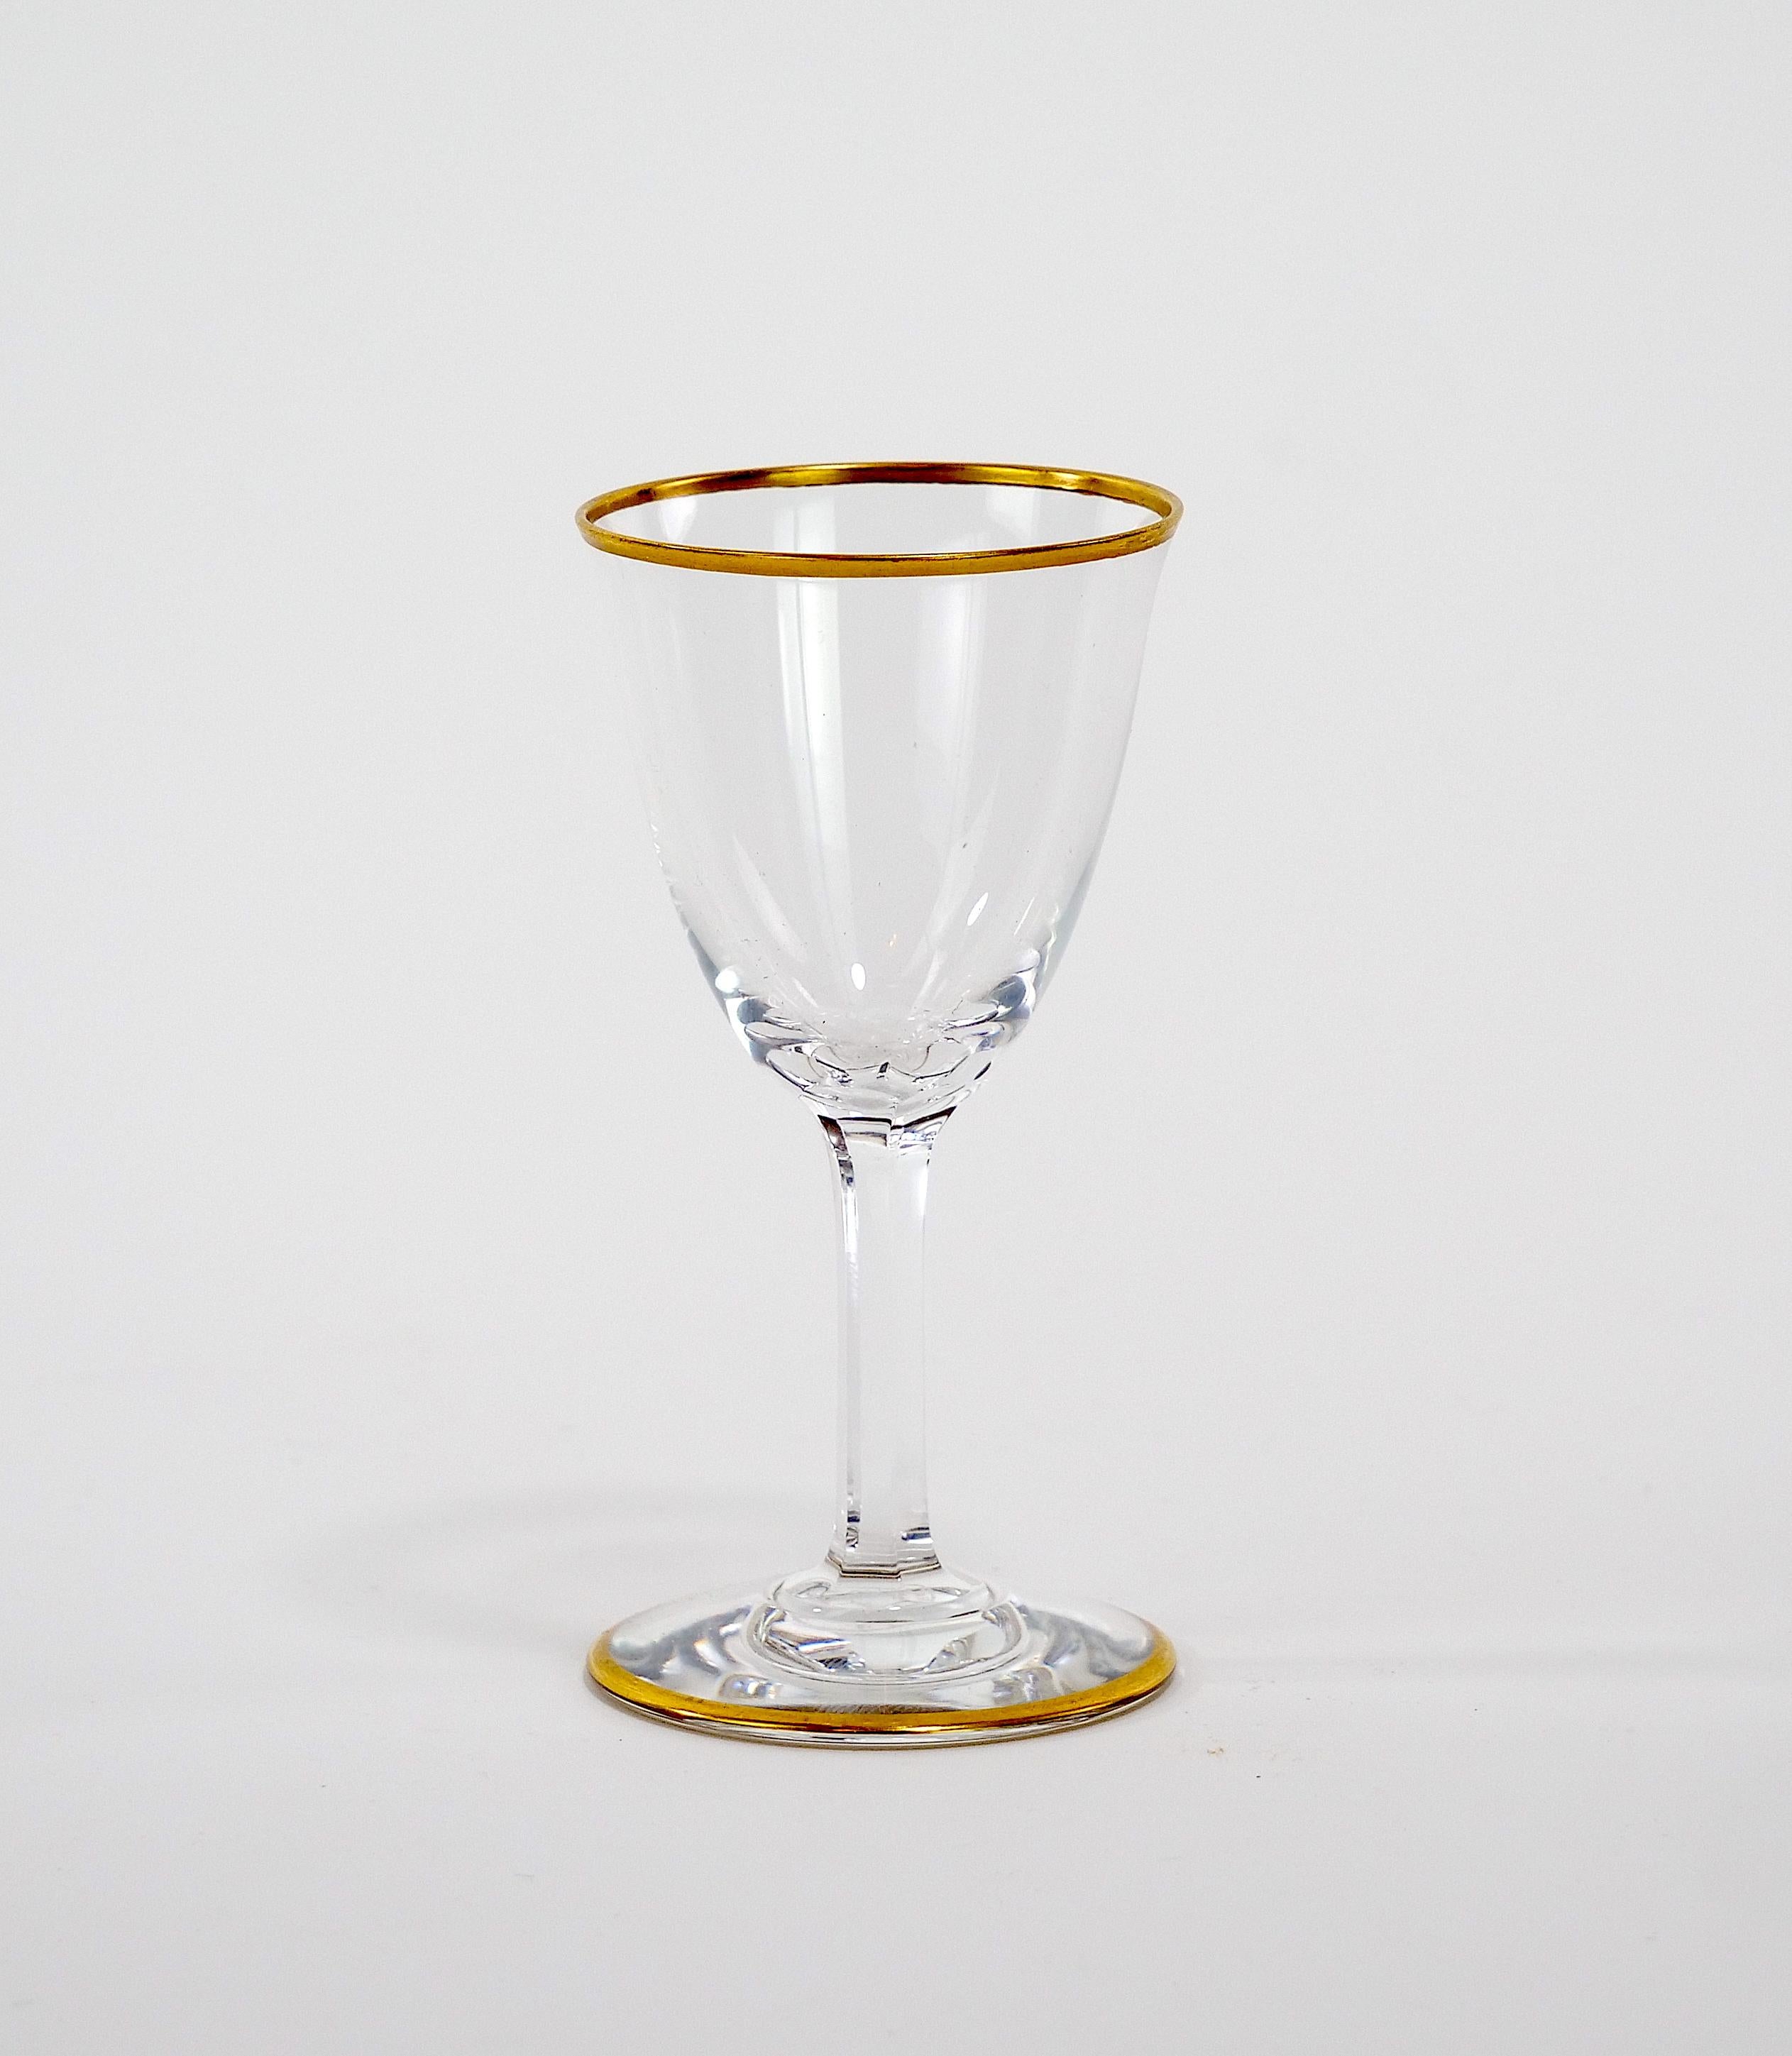 Mid-20th Century Baccarat Crystal Liquor / Sherry Glassware Service / 12 People For Sale